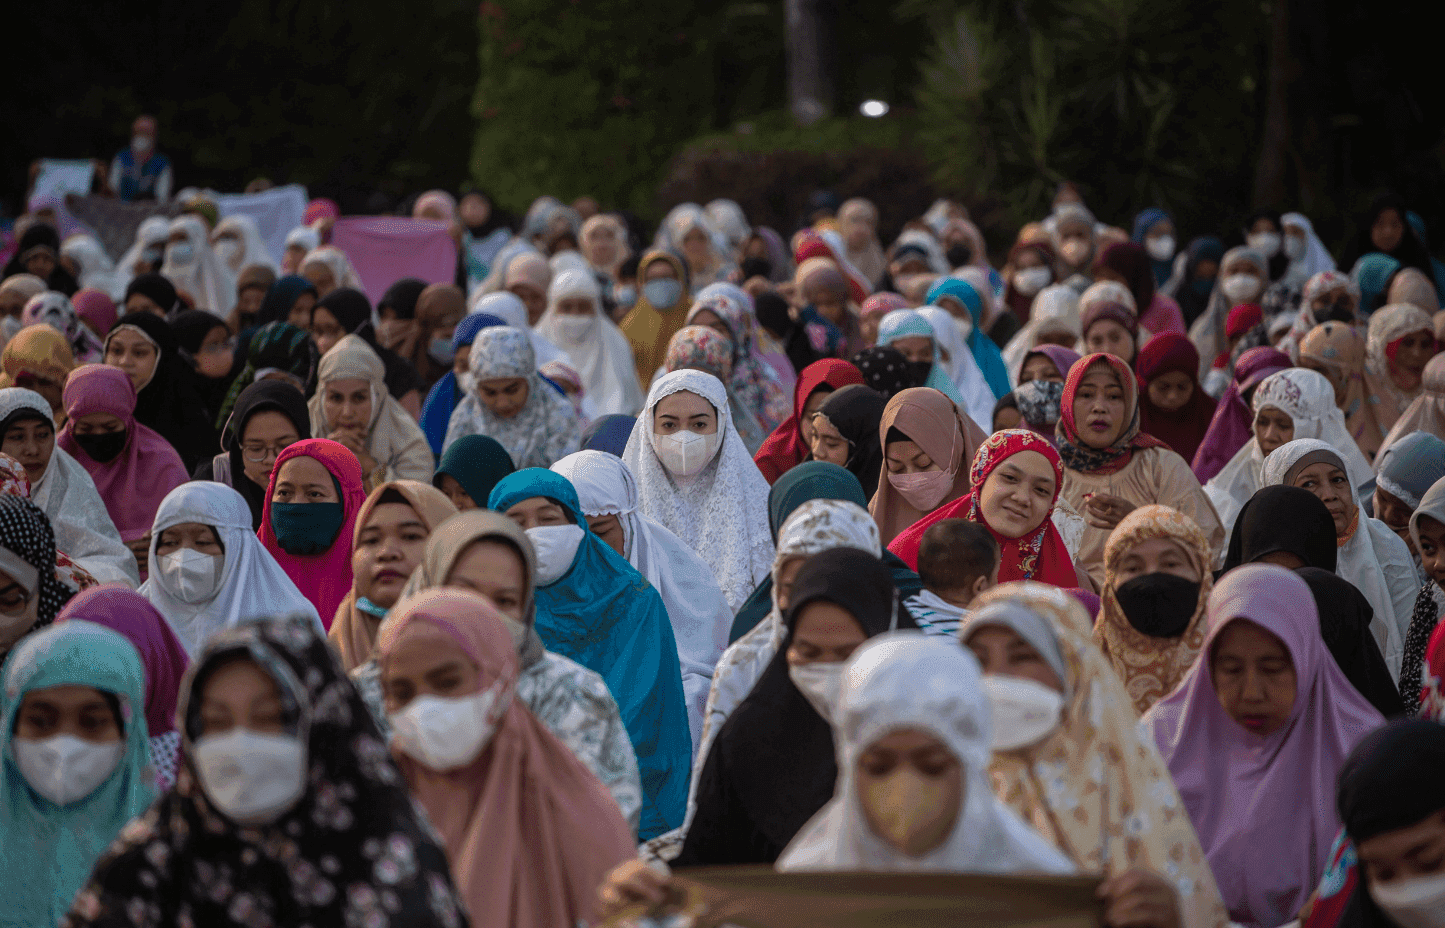 PBBM declares June 28 as national holiday in observance of Eid'l Adha